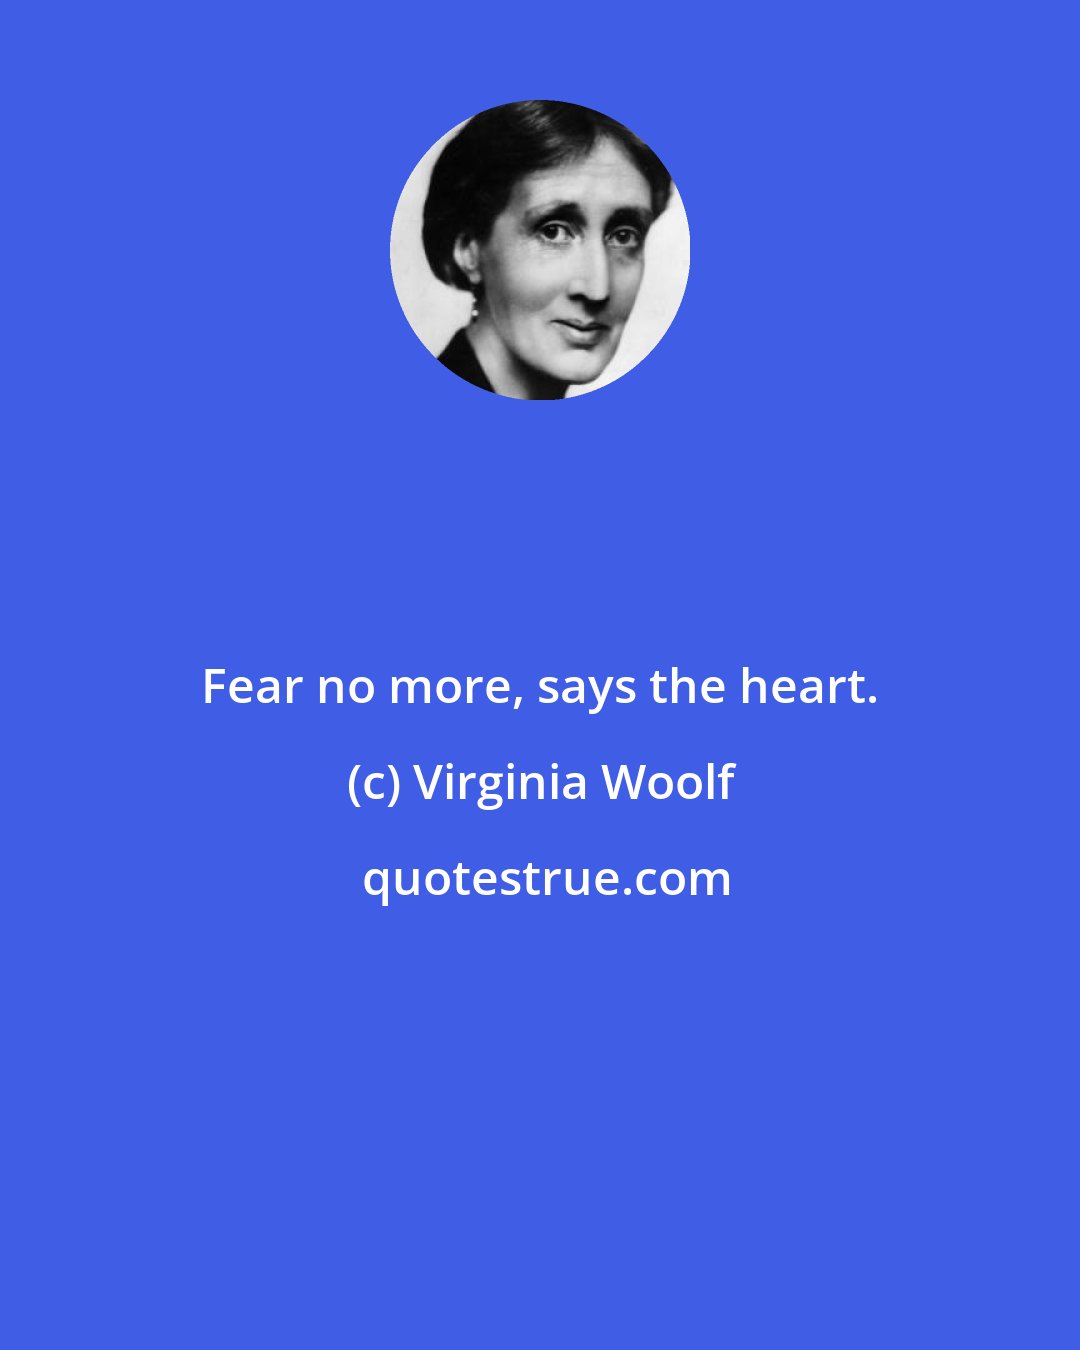 Virginia Woolf: Fear no more, says the heart.